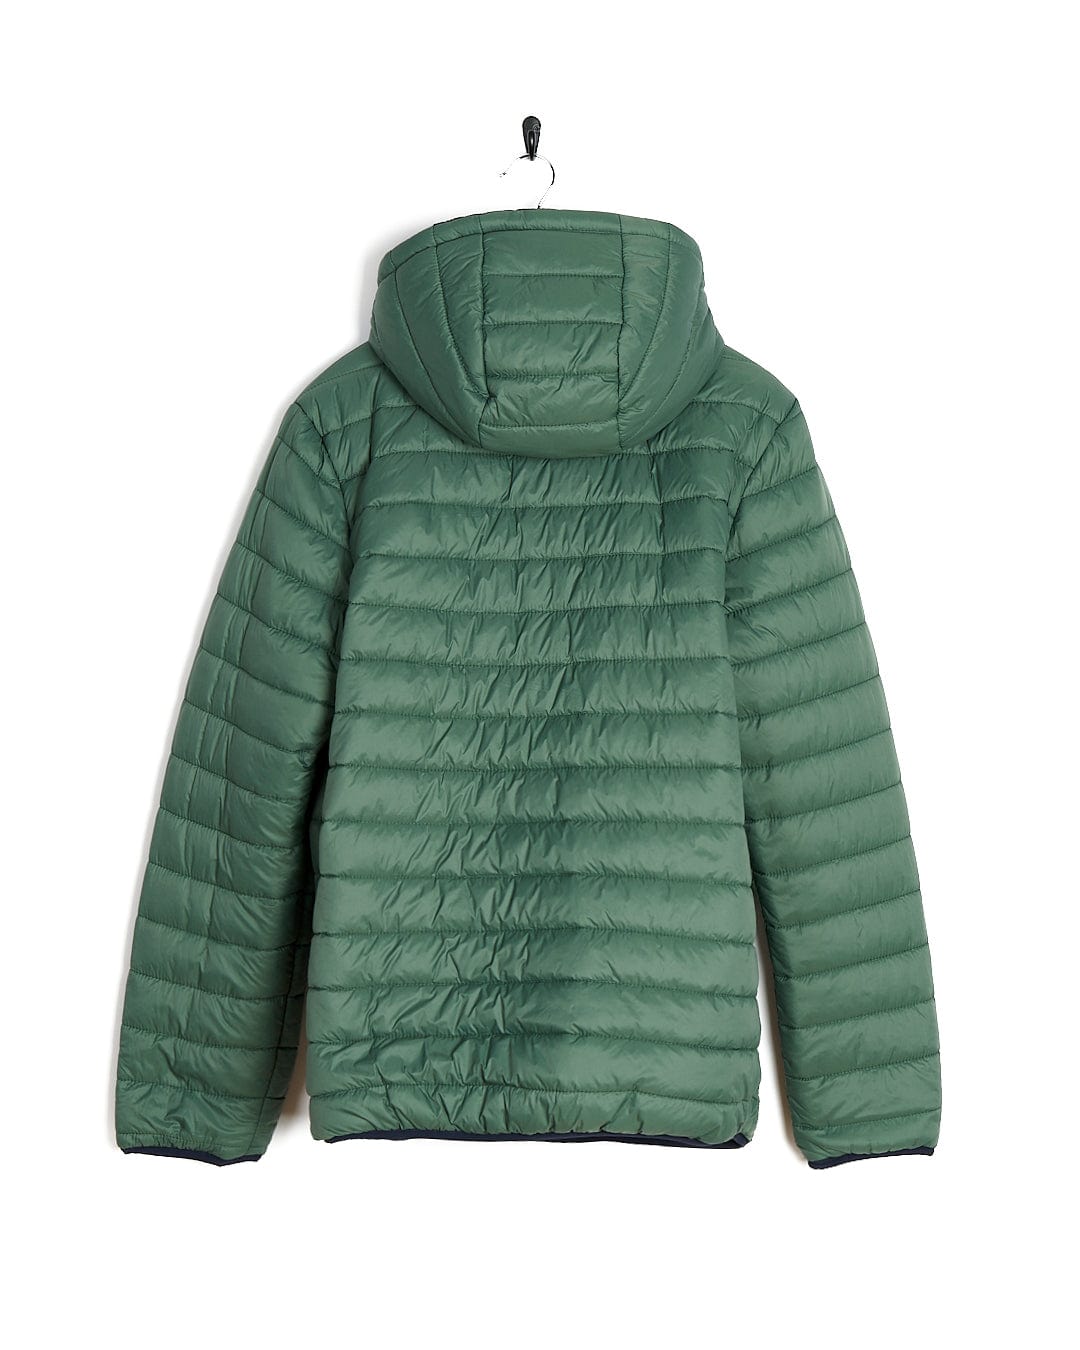 A green Saltrock Rusik 2 - Reversible Padded Jacket with water resistance, featuring zip pockets, hanging on a wall.